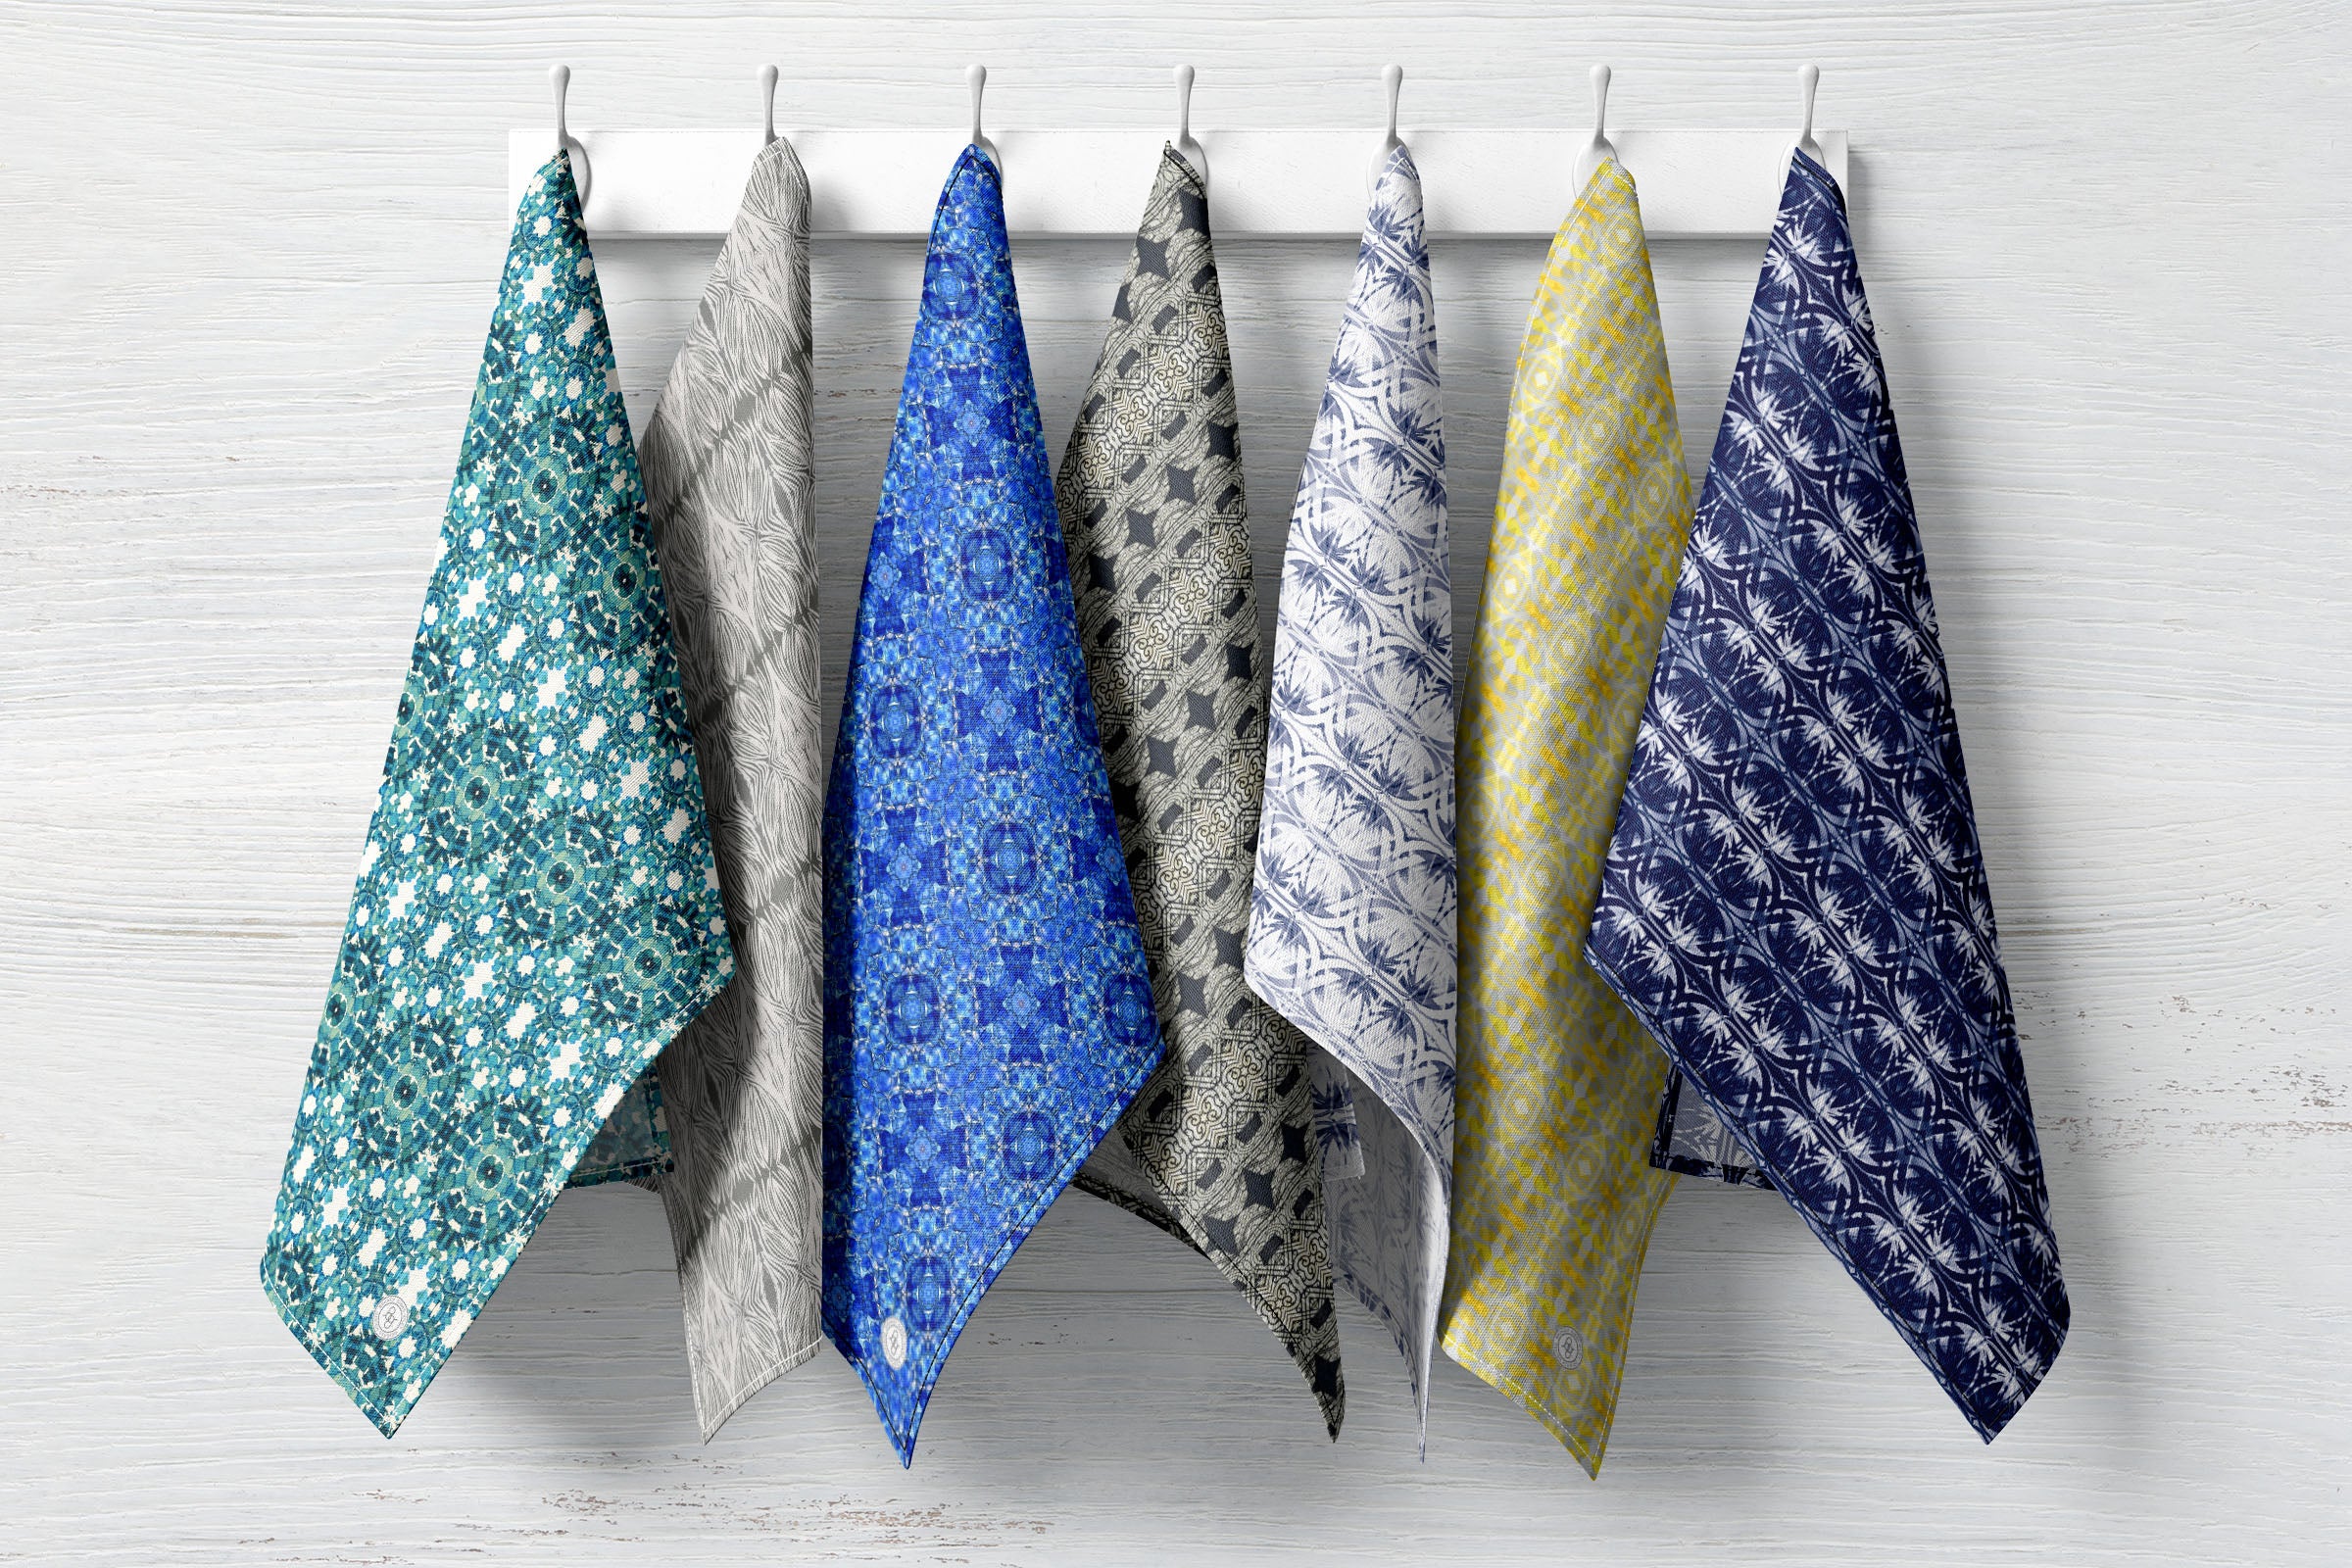 Collection of tea towels hanging on hooks, featuring hand-painted patterns